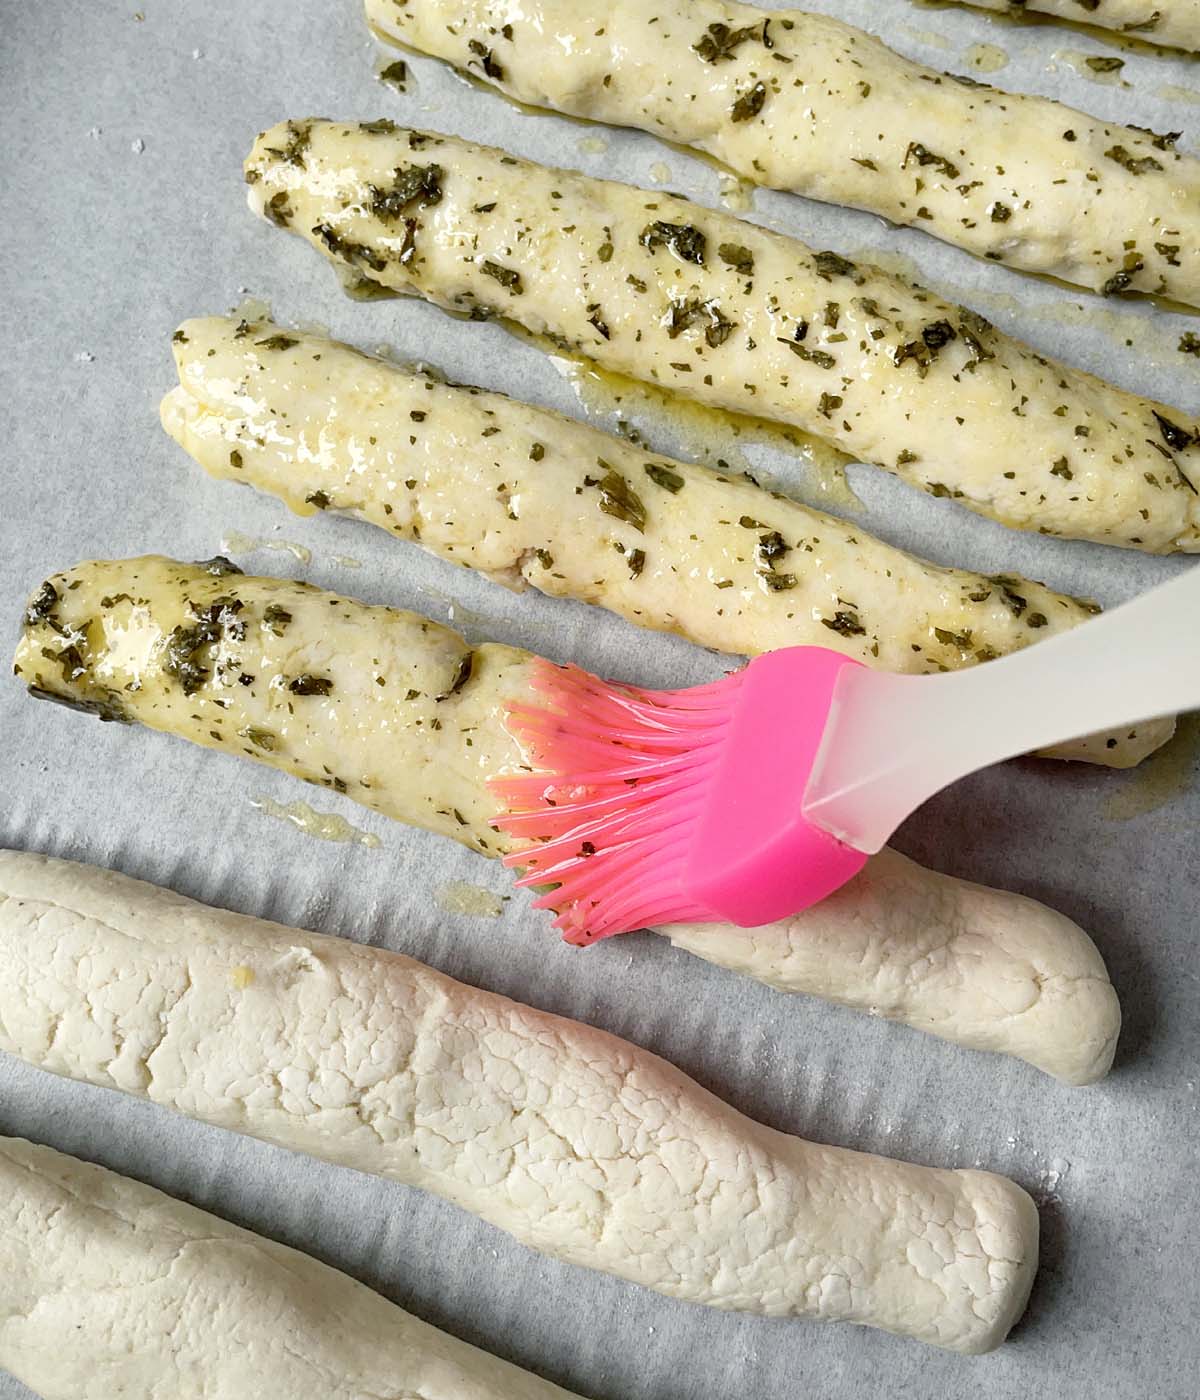 Melted butter with parsley bits being brushed on breadstick dough with a pink brush.